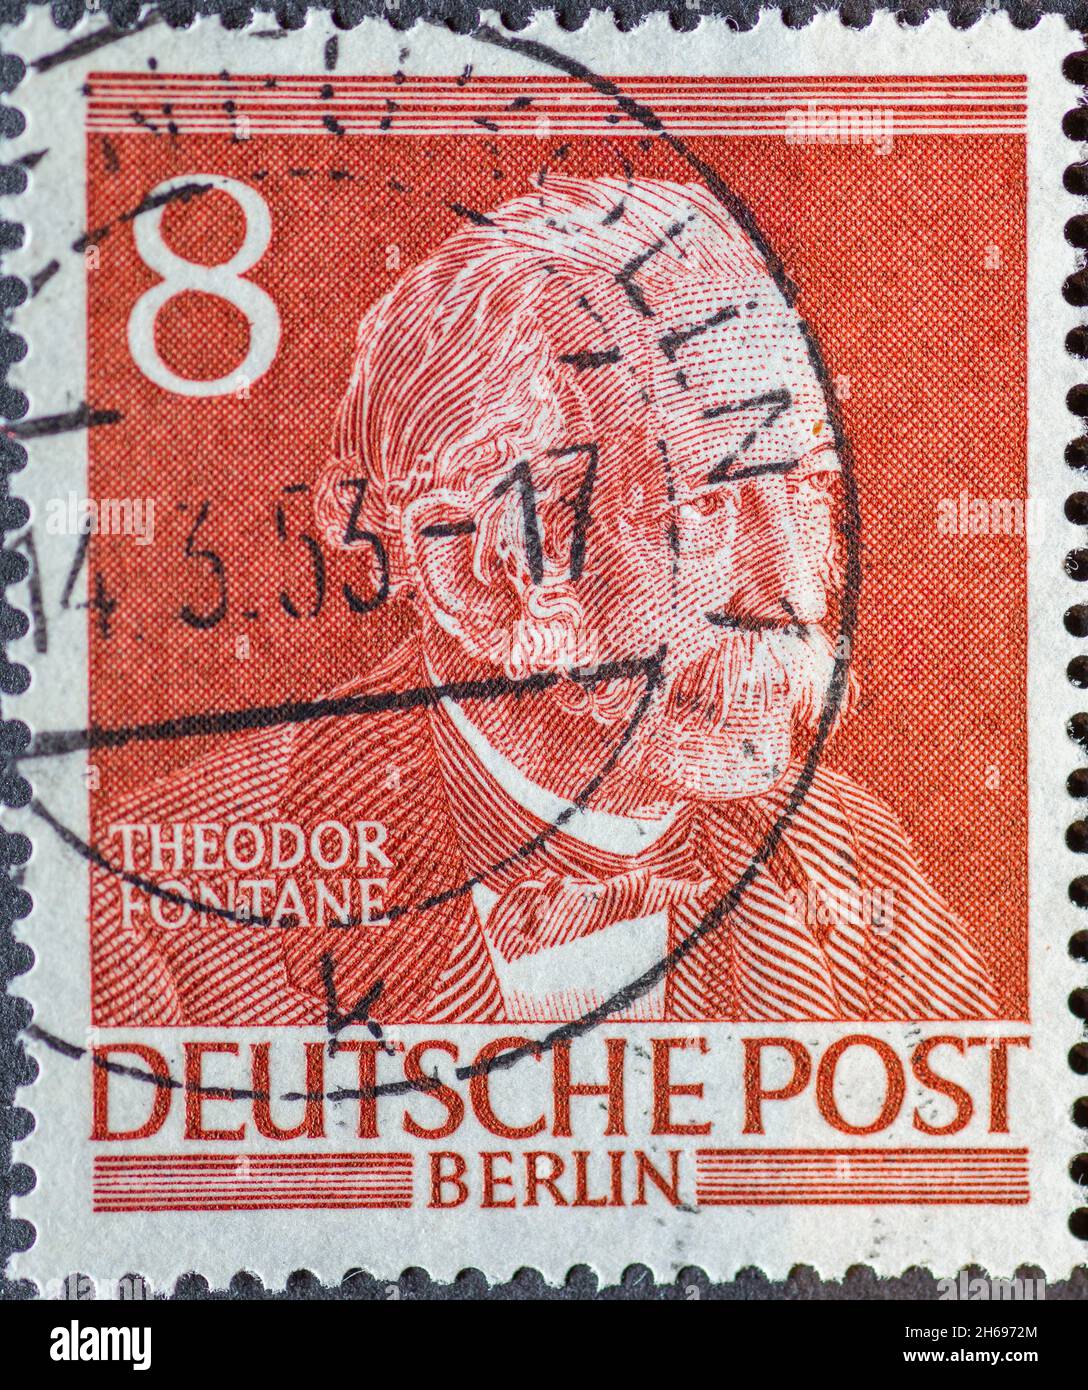 GERMANY, Berlin - CIRCA 1953: a postage stamp from Germany, Berlin showing Men from the history of Berlin: Theodor Fontane Stock Photo